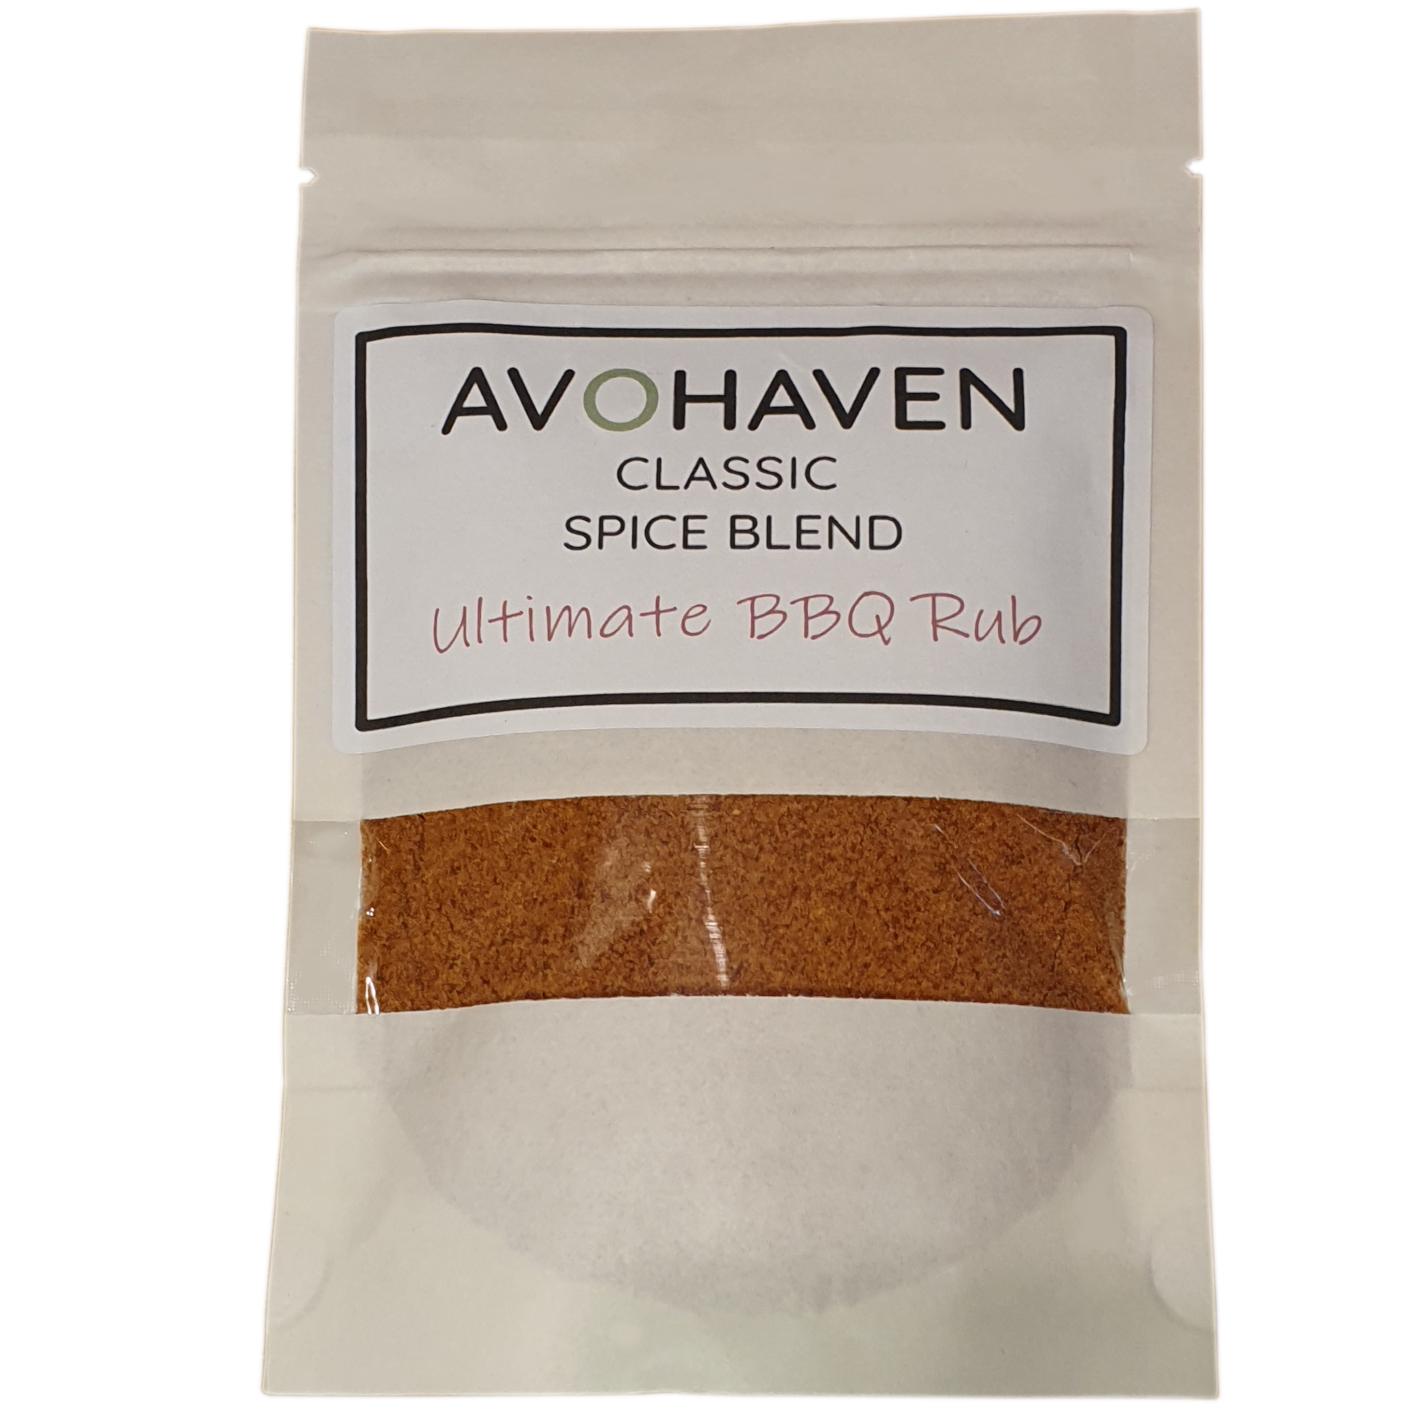 product image for Avohaven - Ultimate BBQ Rub